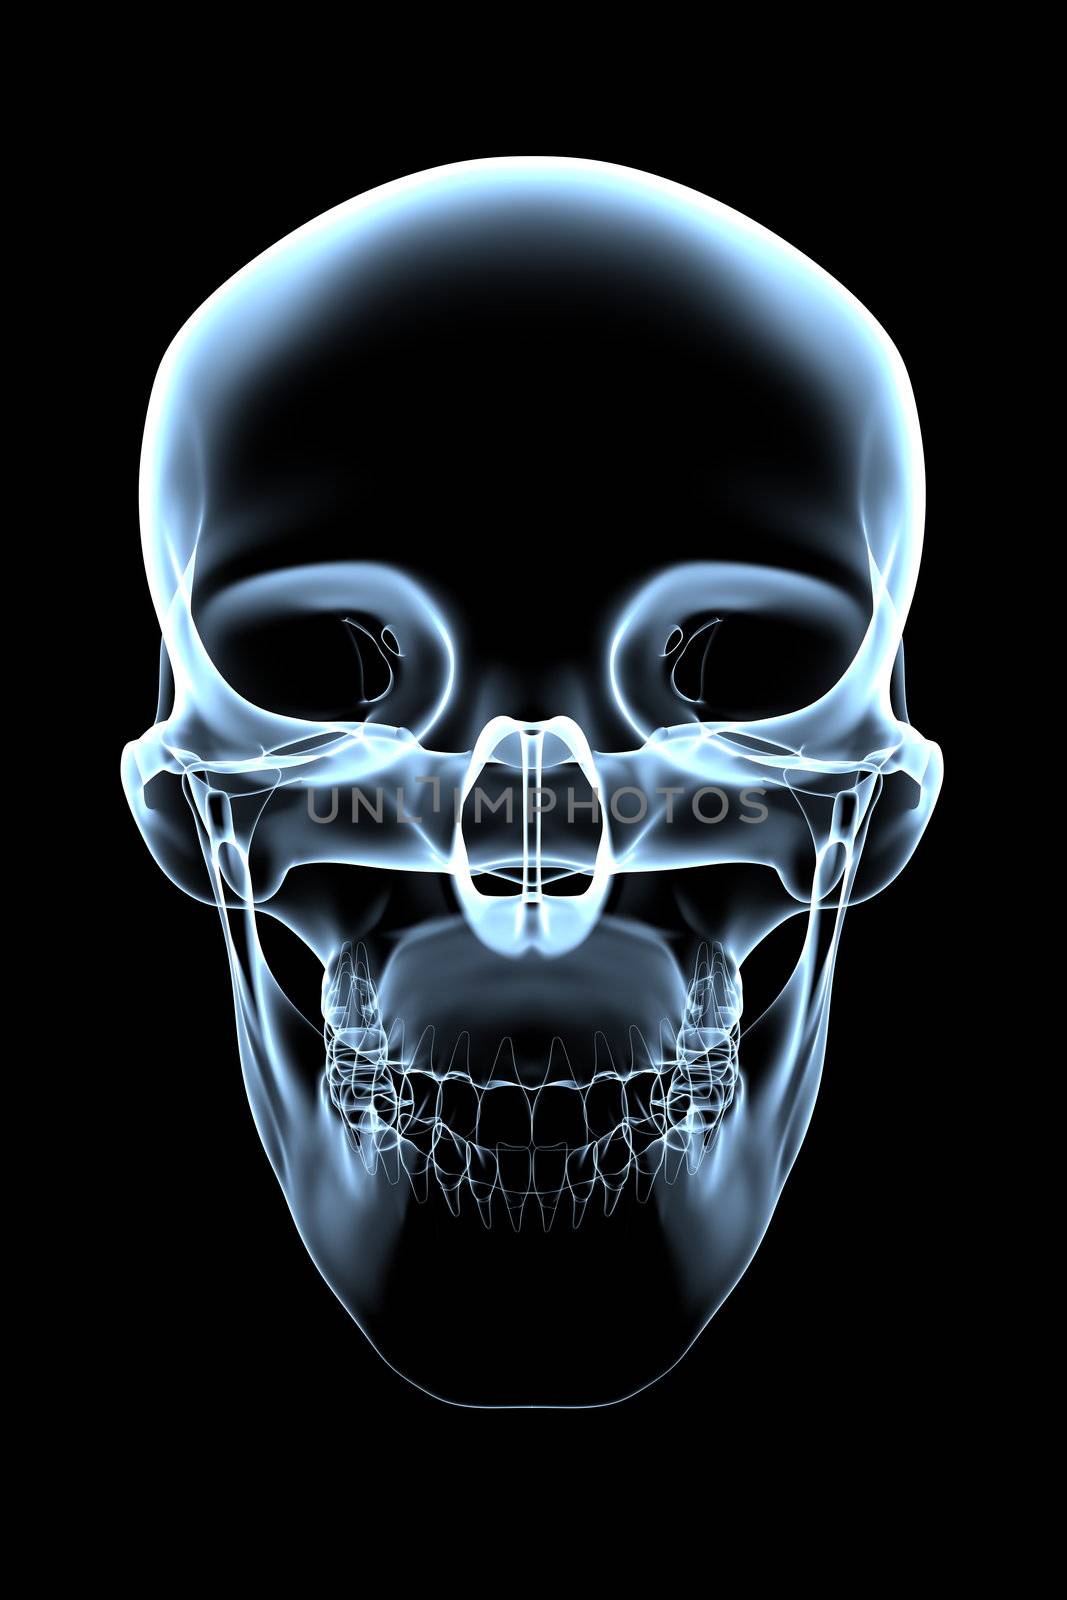 Human Skull - X-Ray Front View by PixBox